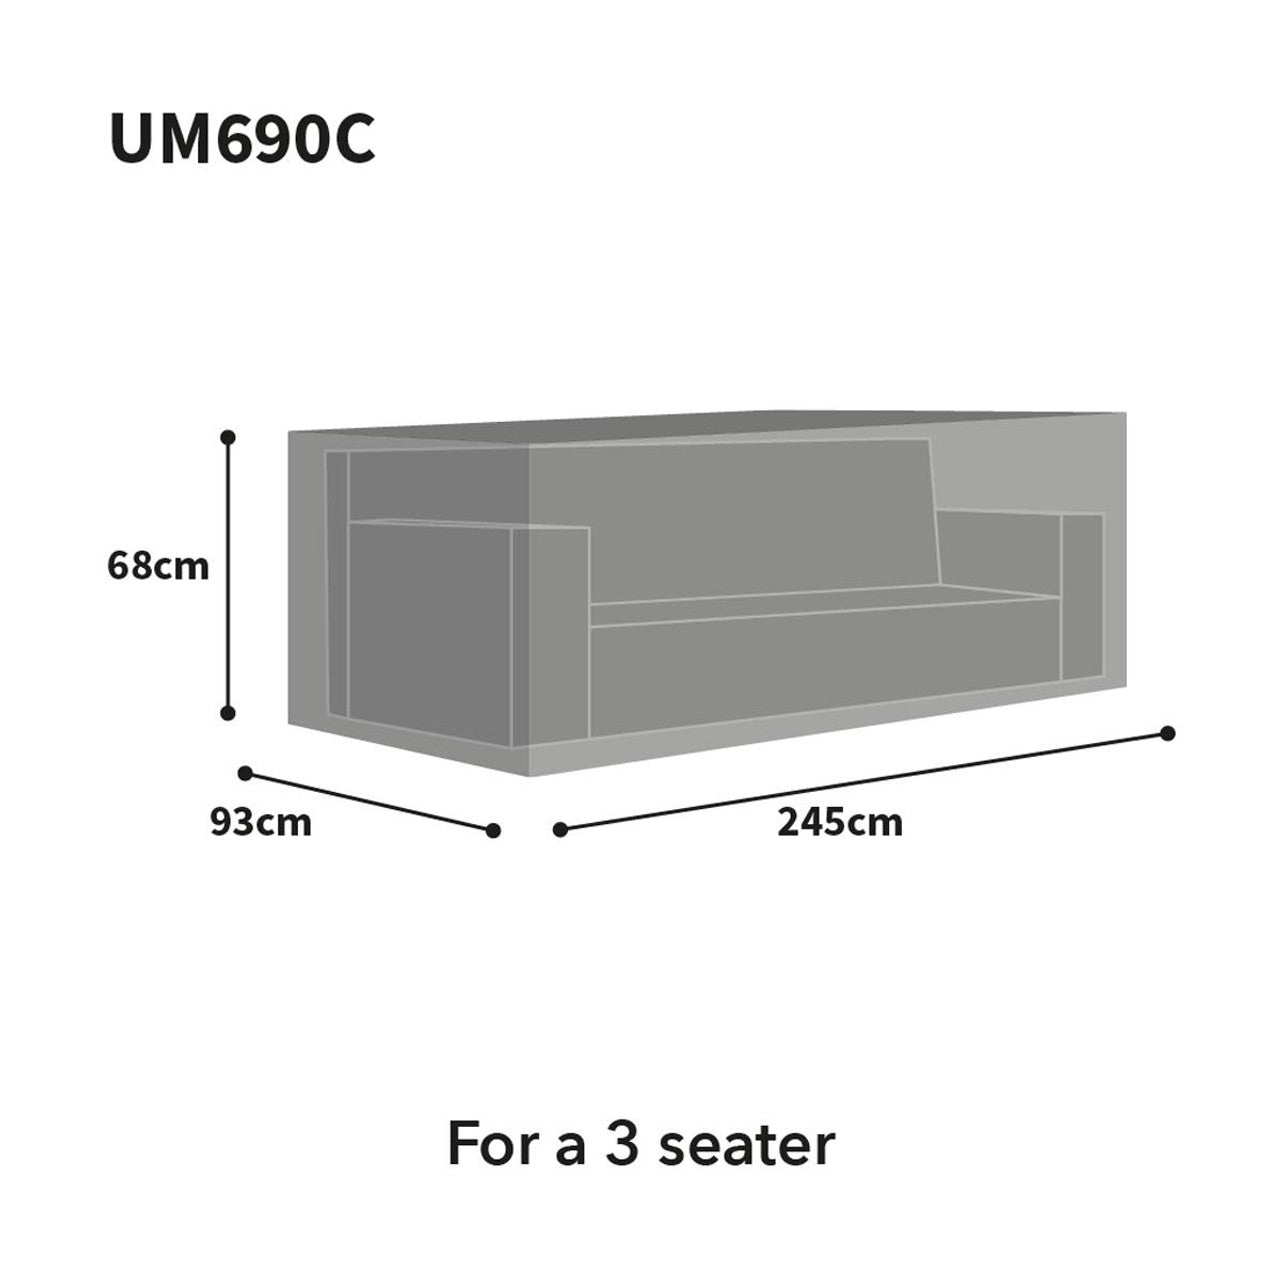 Bosmere Ultimate Protector Outdoor Furniture Cover for Large Sofa 245cm x 93cm